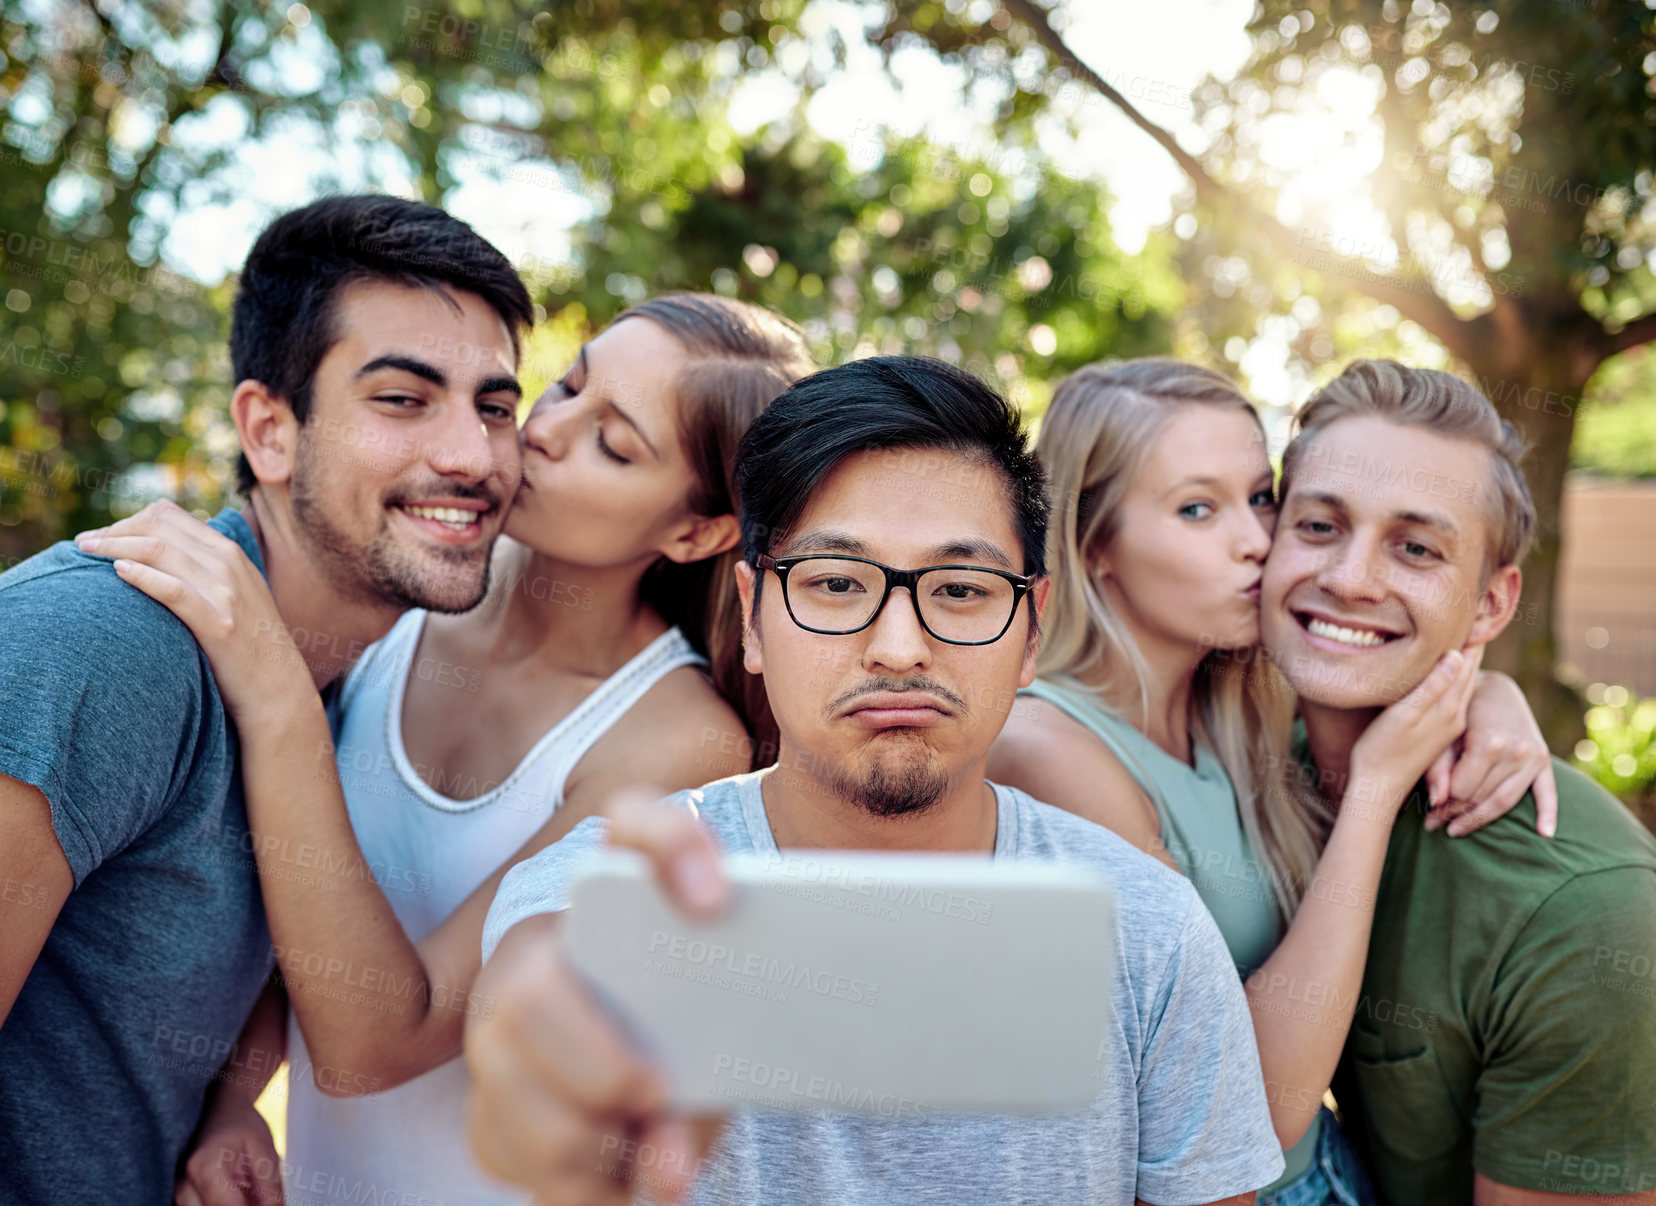 Buy stock photo Cropped shot of a young group of friends taking selfies while enjoying a few drinks outside in the summer sun